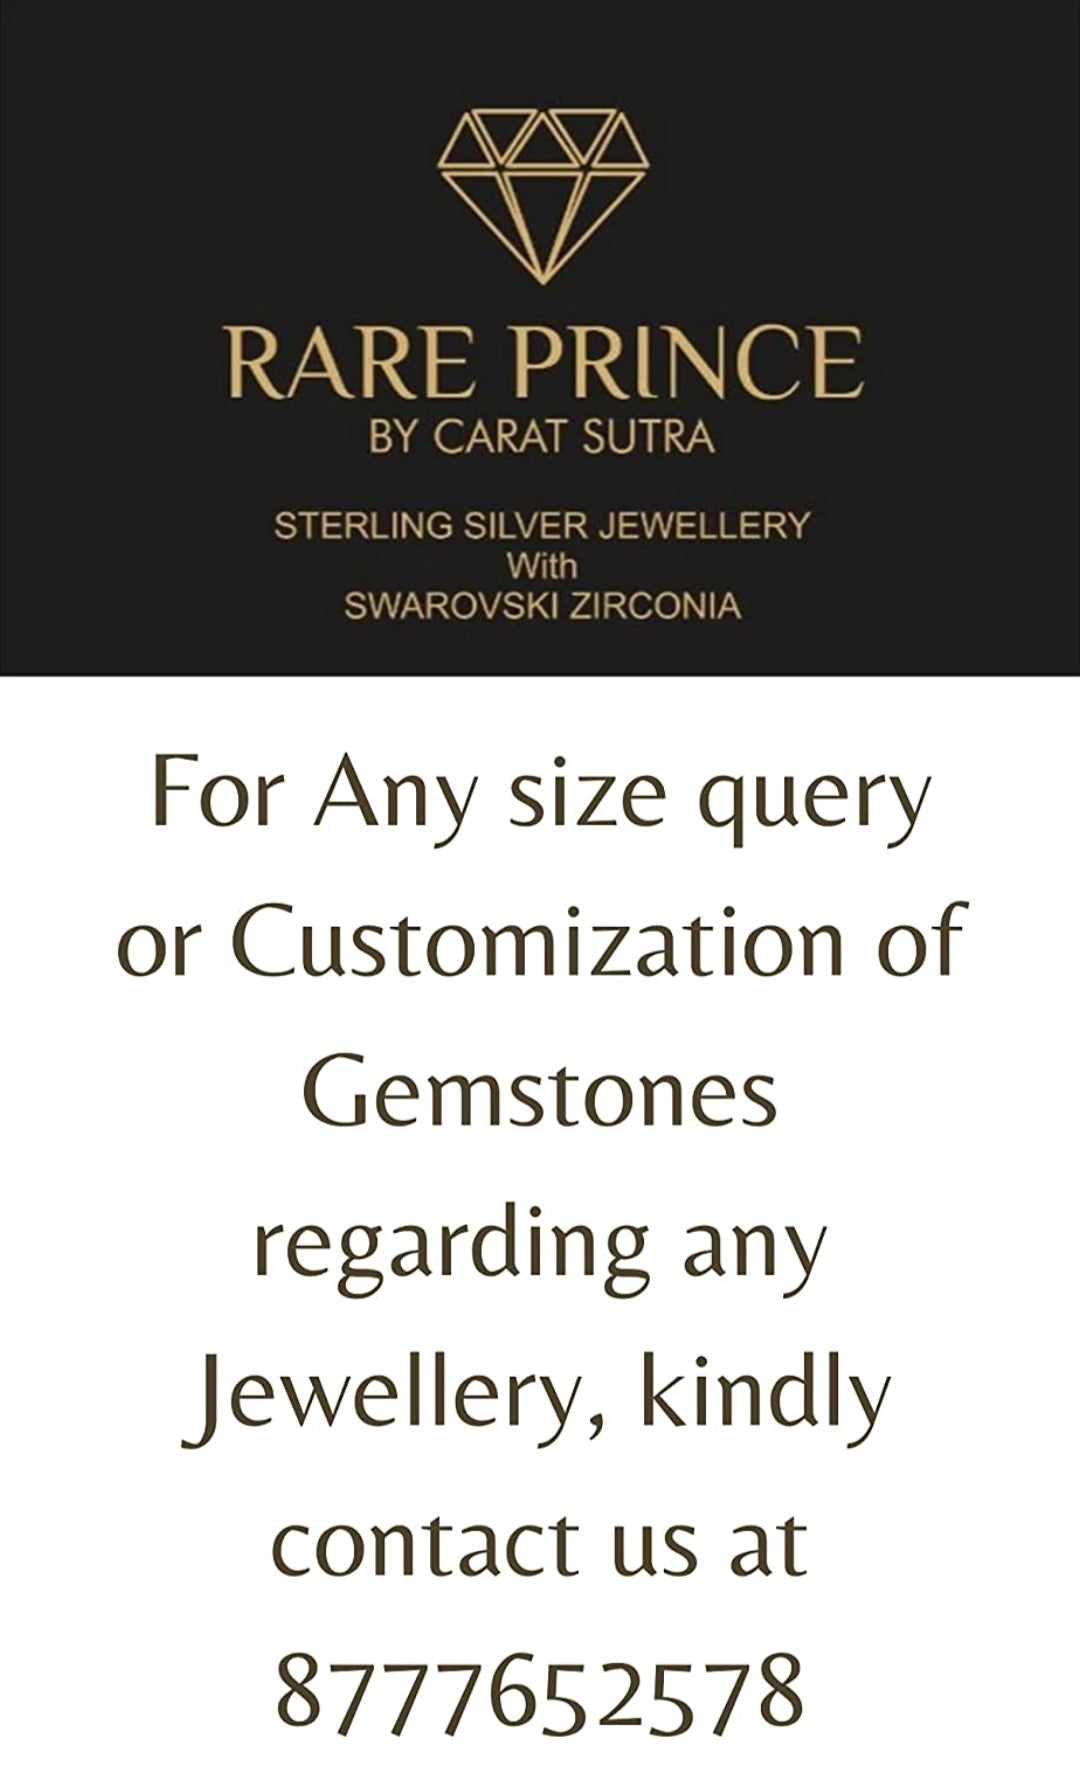 RARE PRINCE by CARAT SUTRA | 10mm Wide Solid Miami Cuban Link Chain | 22kt Gold Micron Plated 925 Sterling Silver Chain | Men's Jewelry | With Certificate of Authenticity and 925 Hallmark - caratsutra